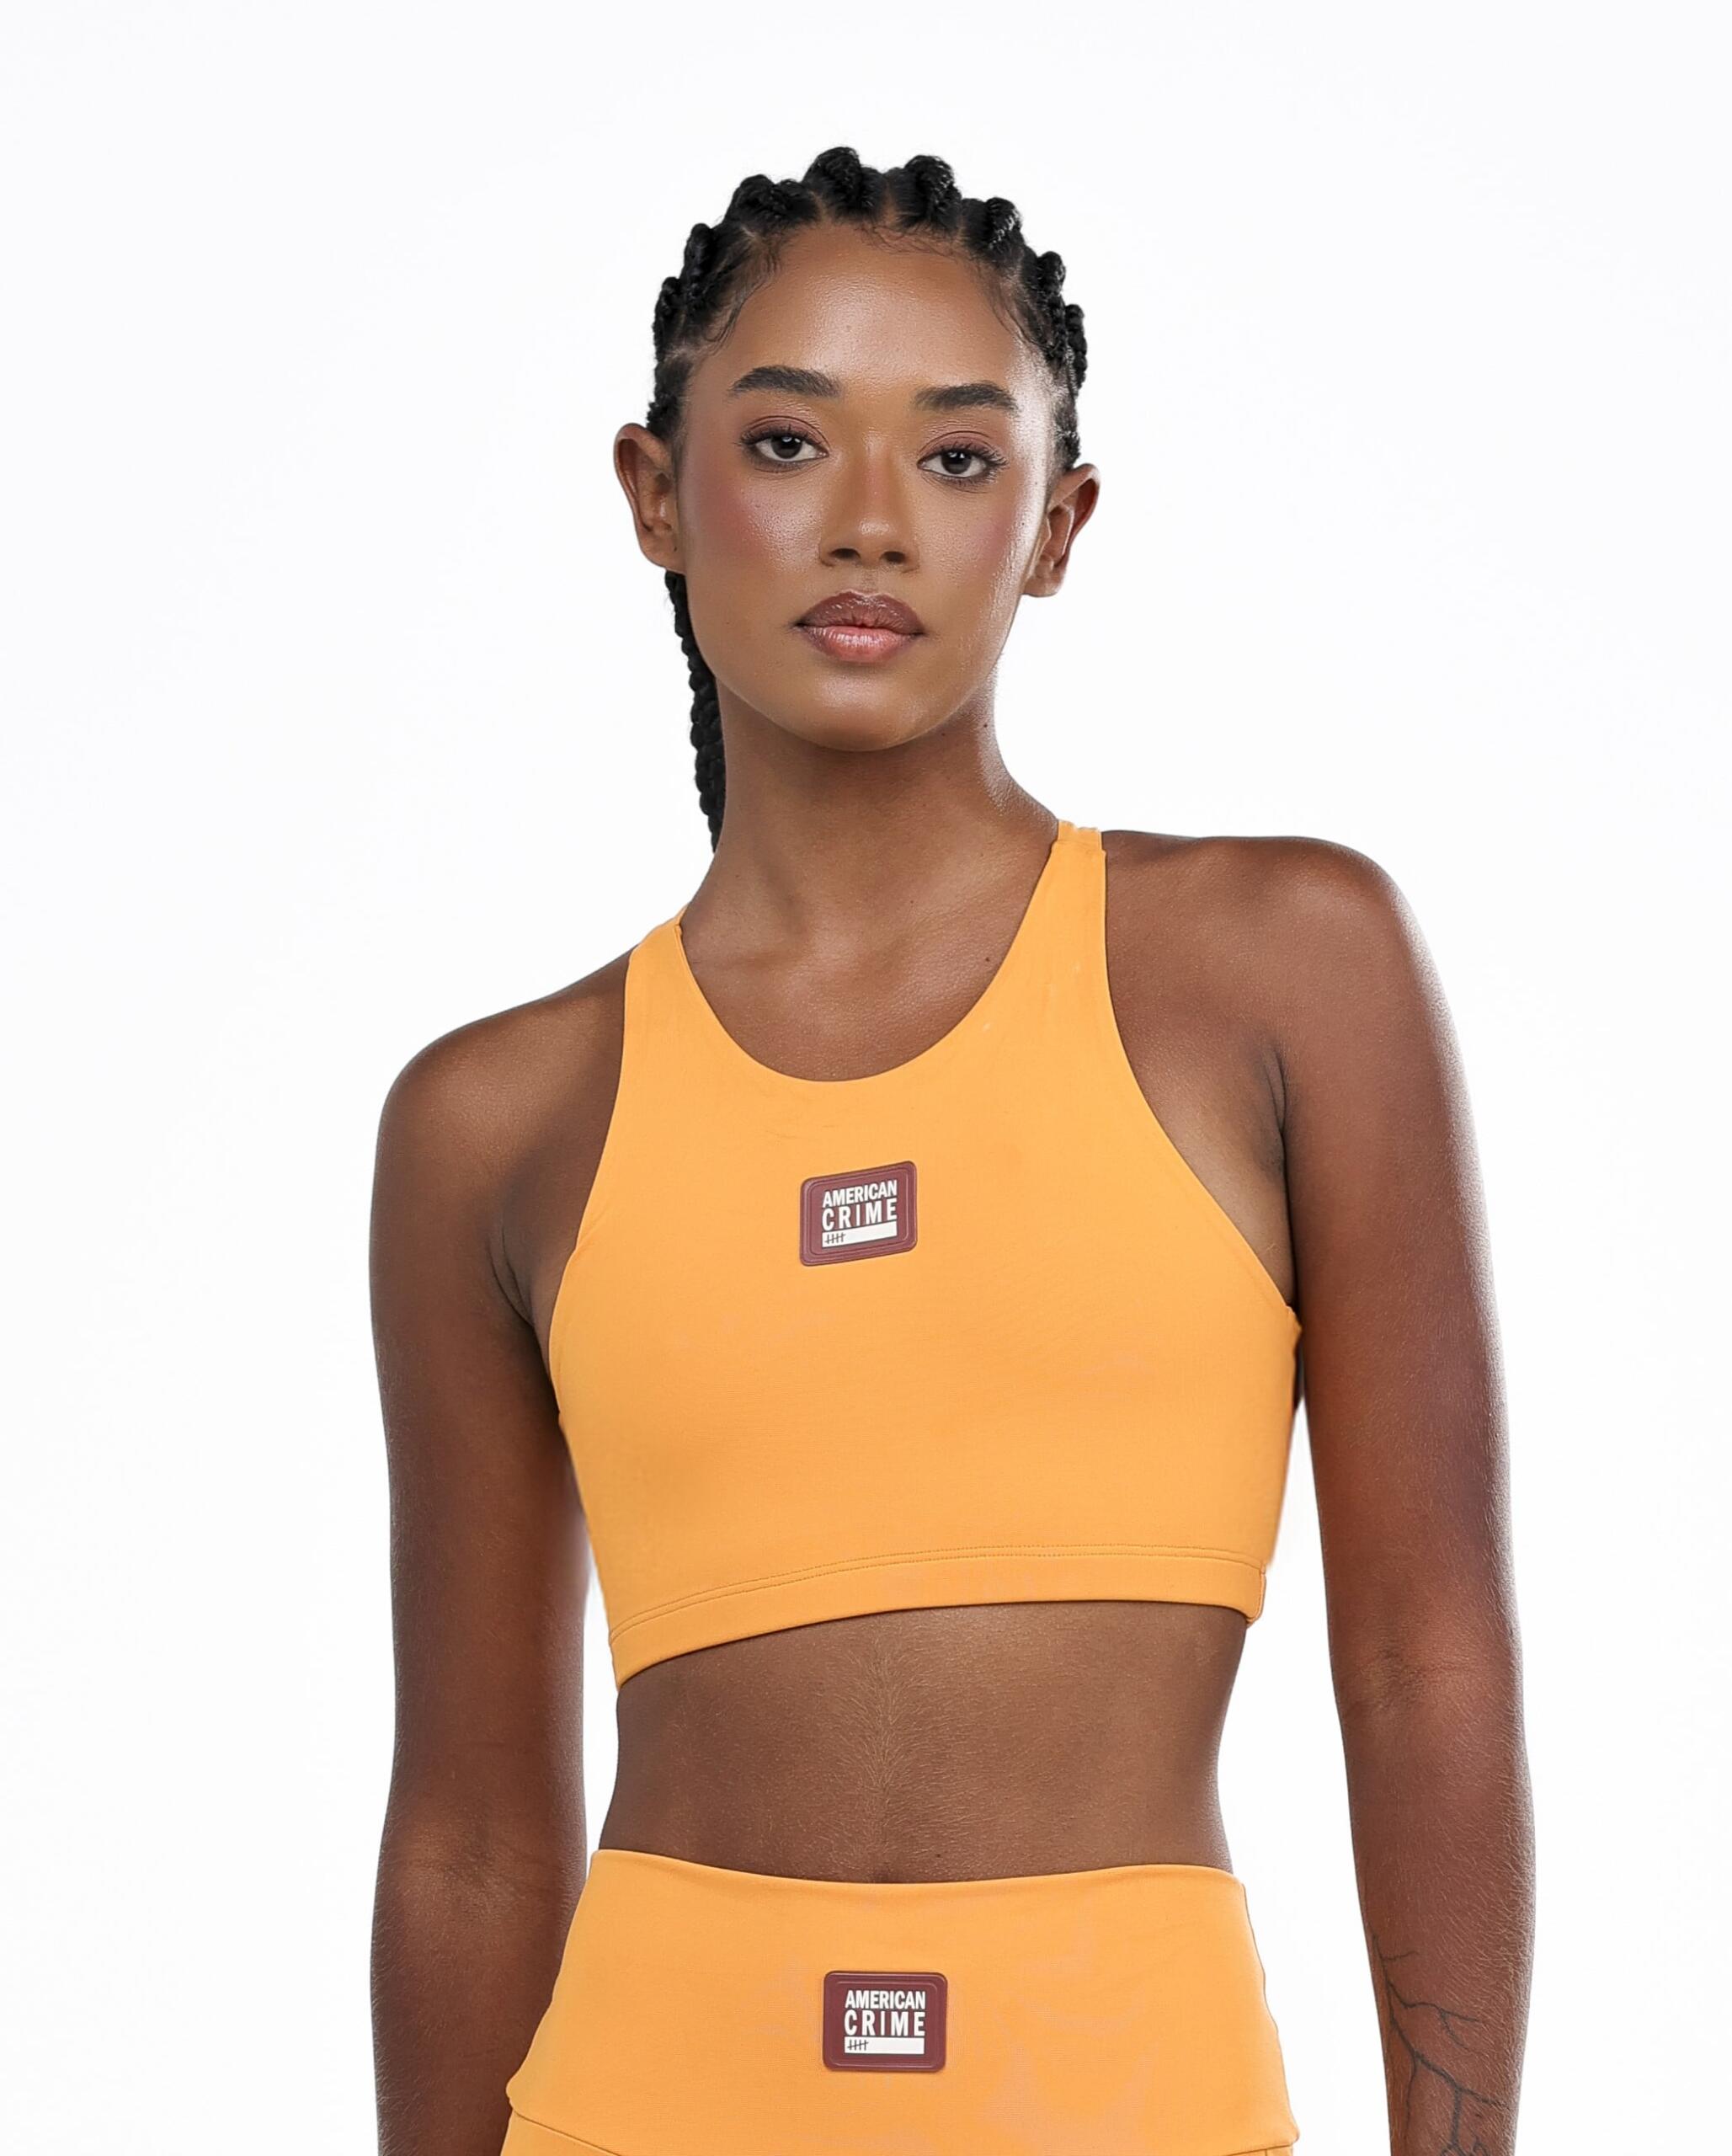 Top Cropped Swimmer Amber ACFIT2-min